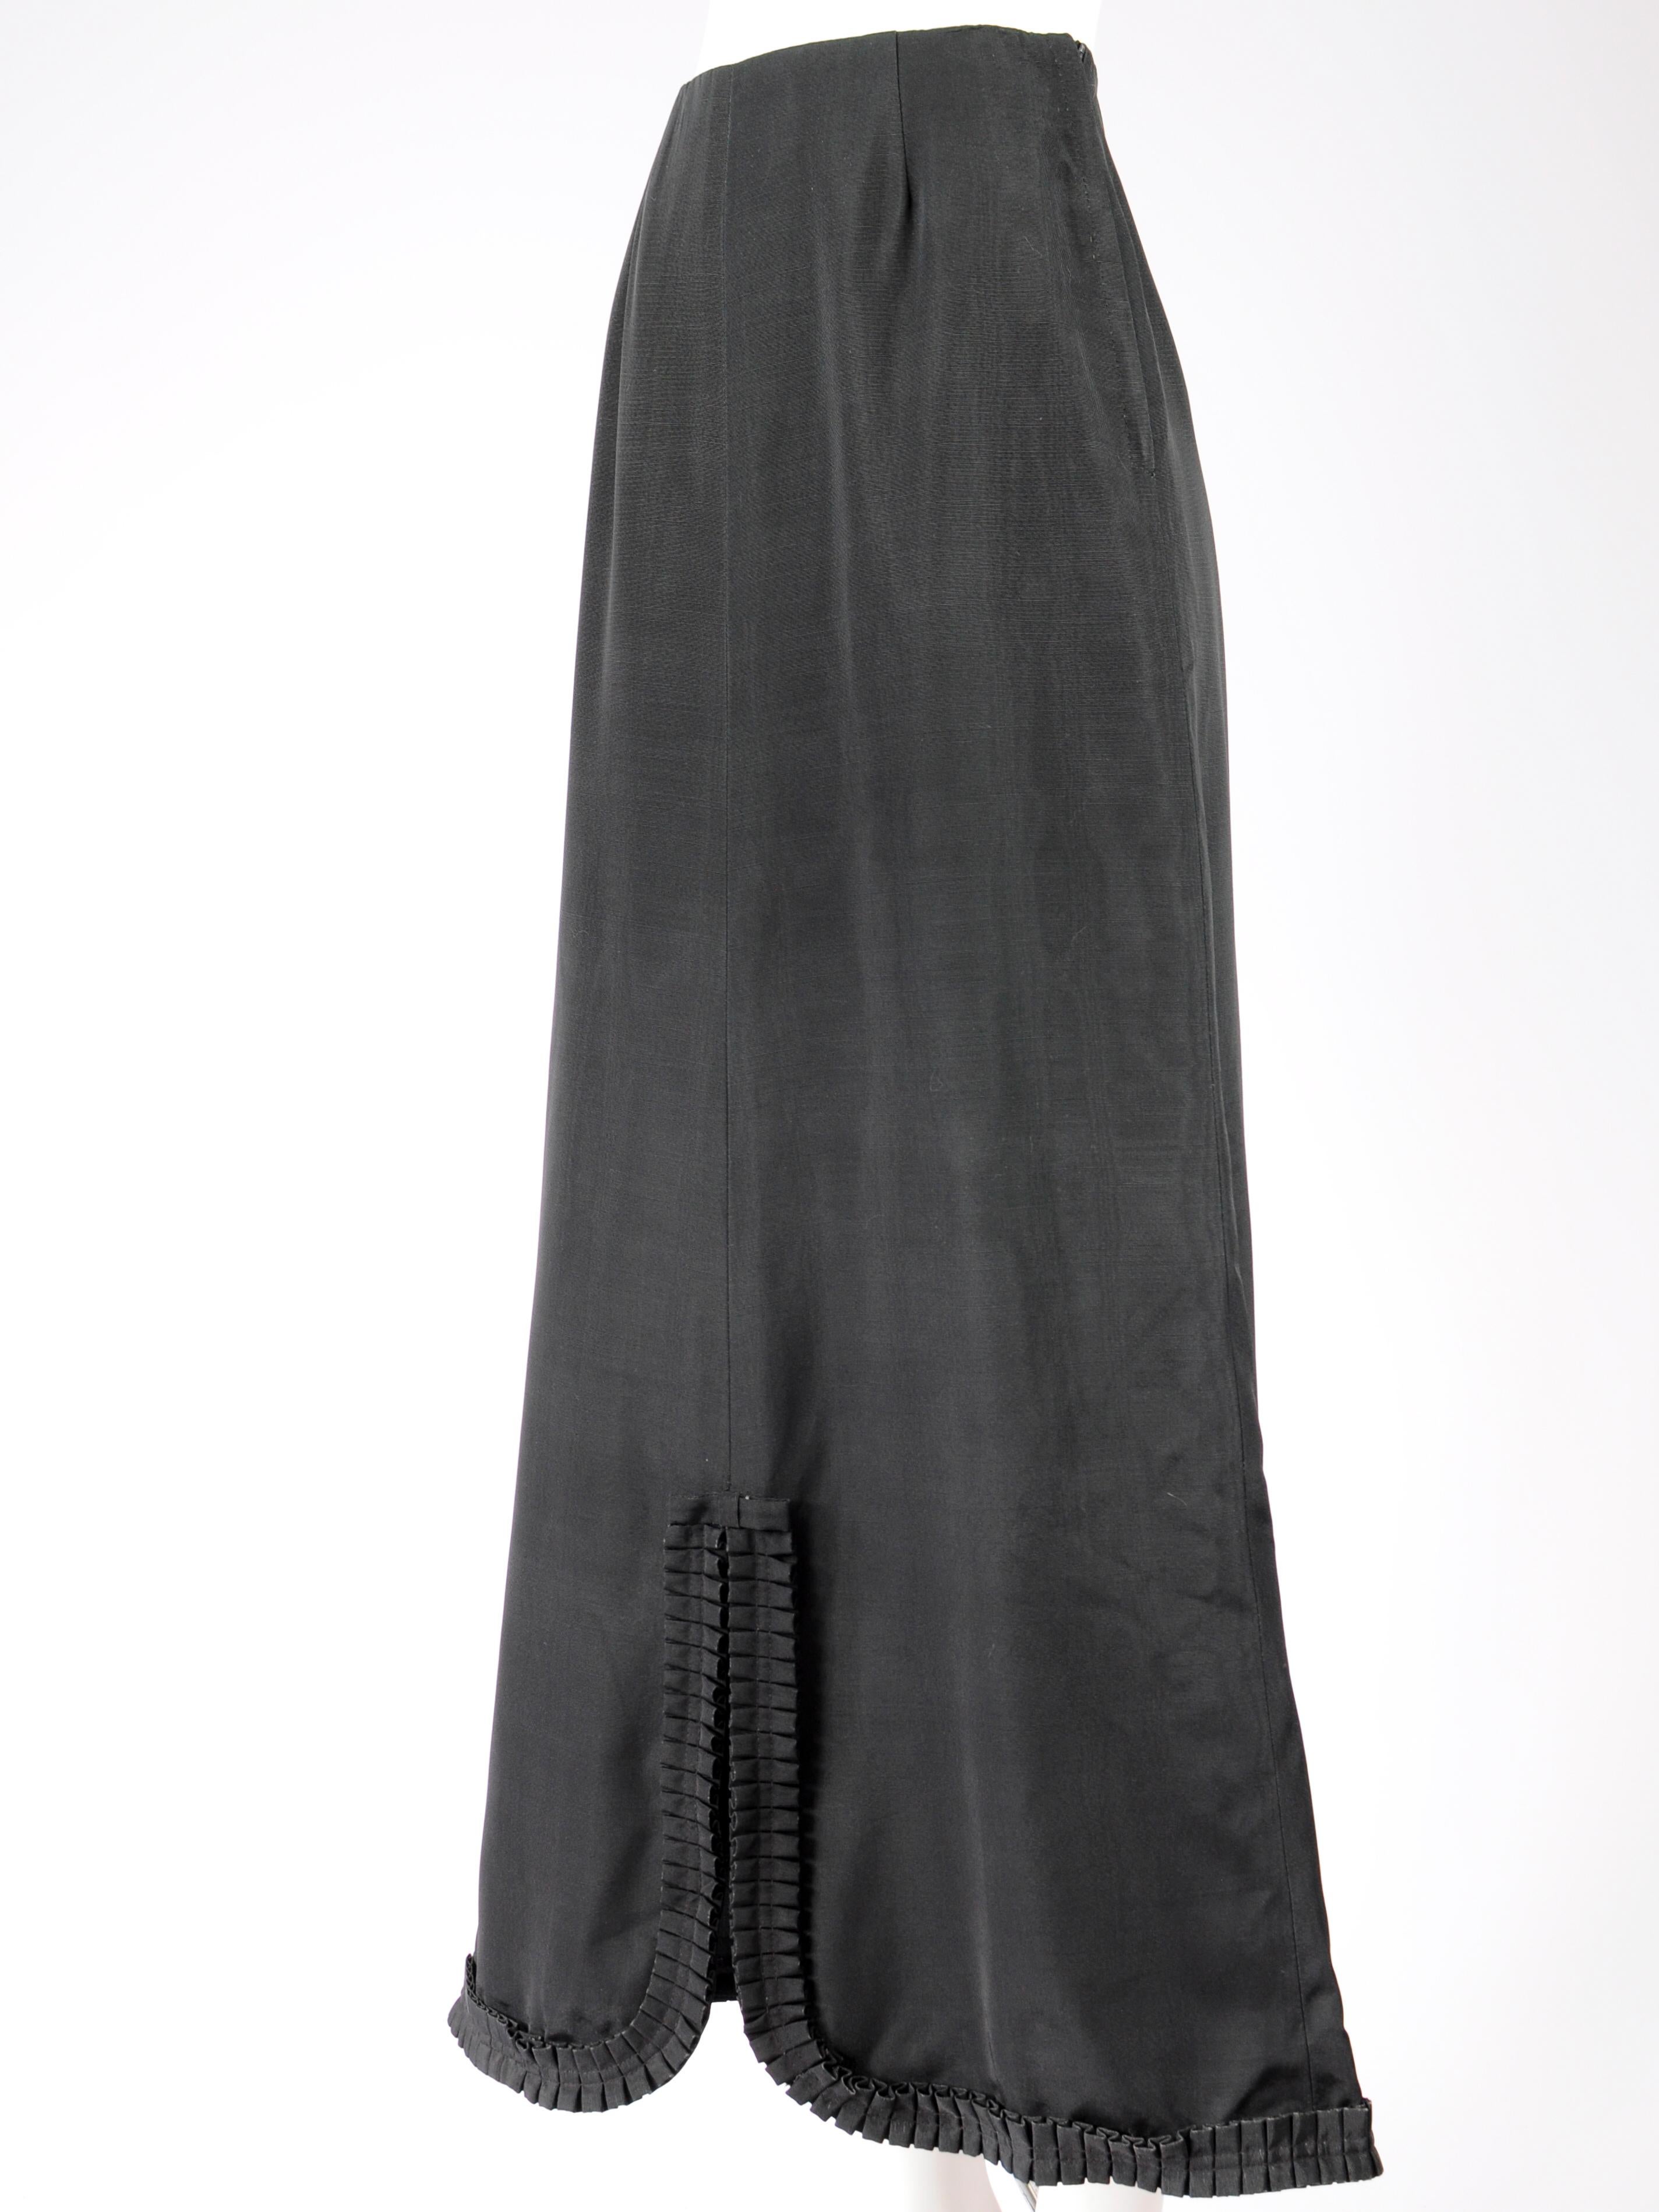 Mary Quant Ginger Group Maxi Skirt A-Line with Bow Ruffle Hem 1960s In Good Condition For Sale In AMSTERDAM, NL